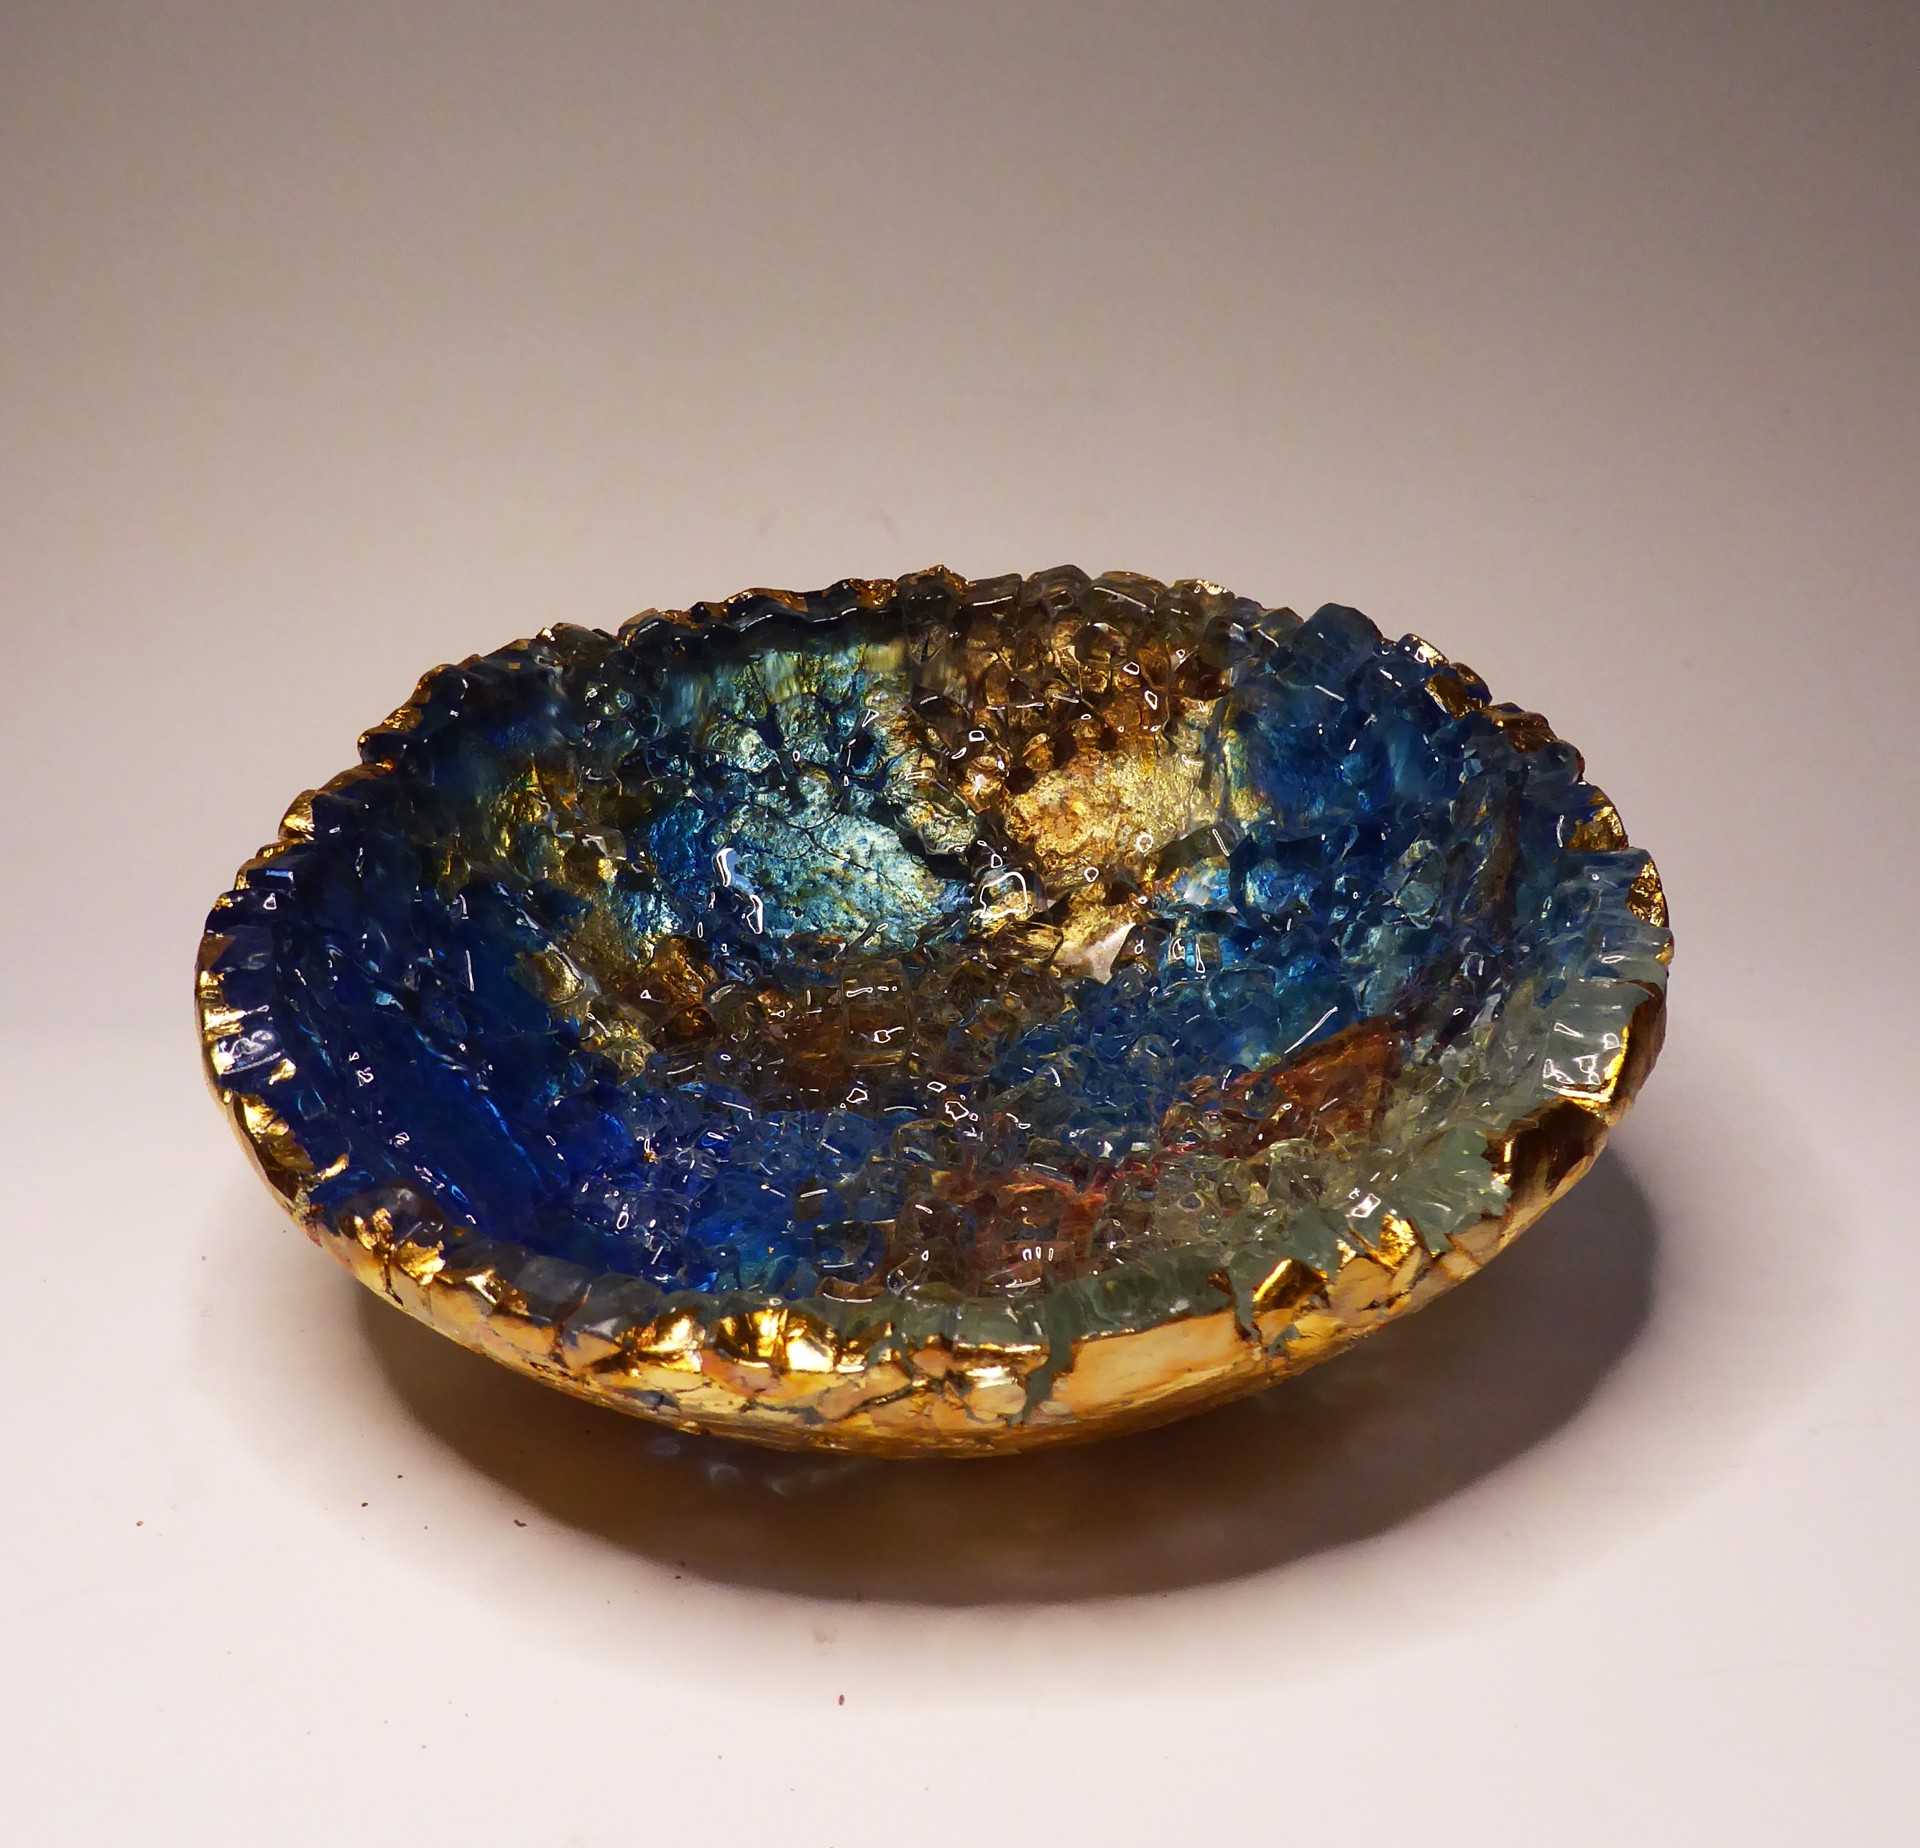 Blue and Brown Vessel by Mira Woodworth